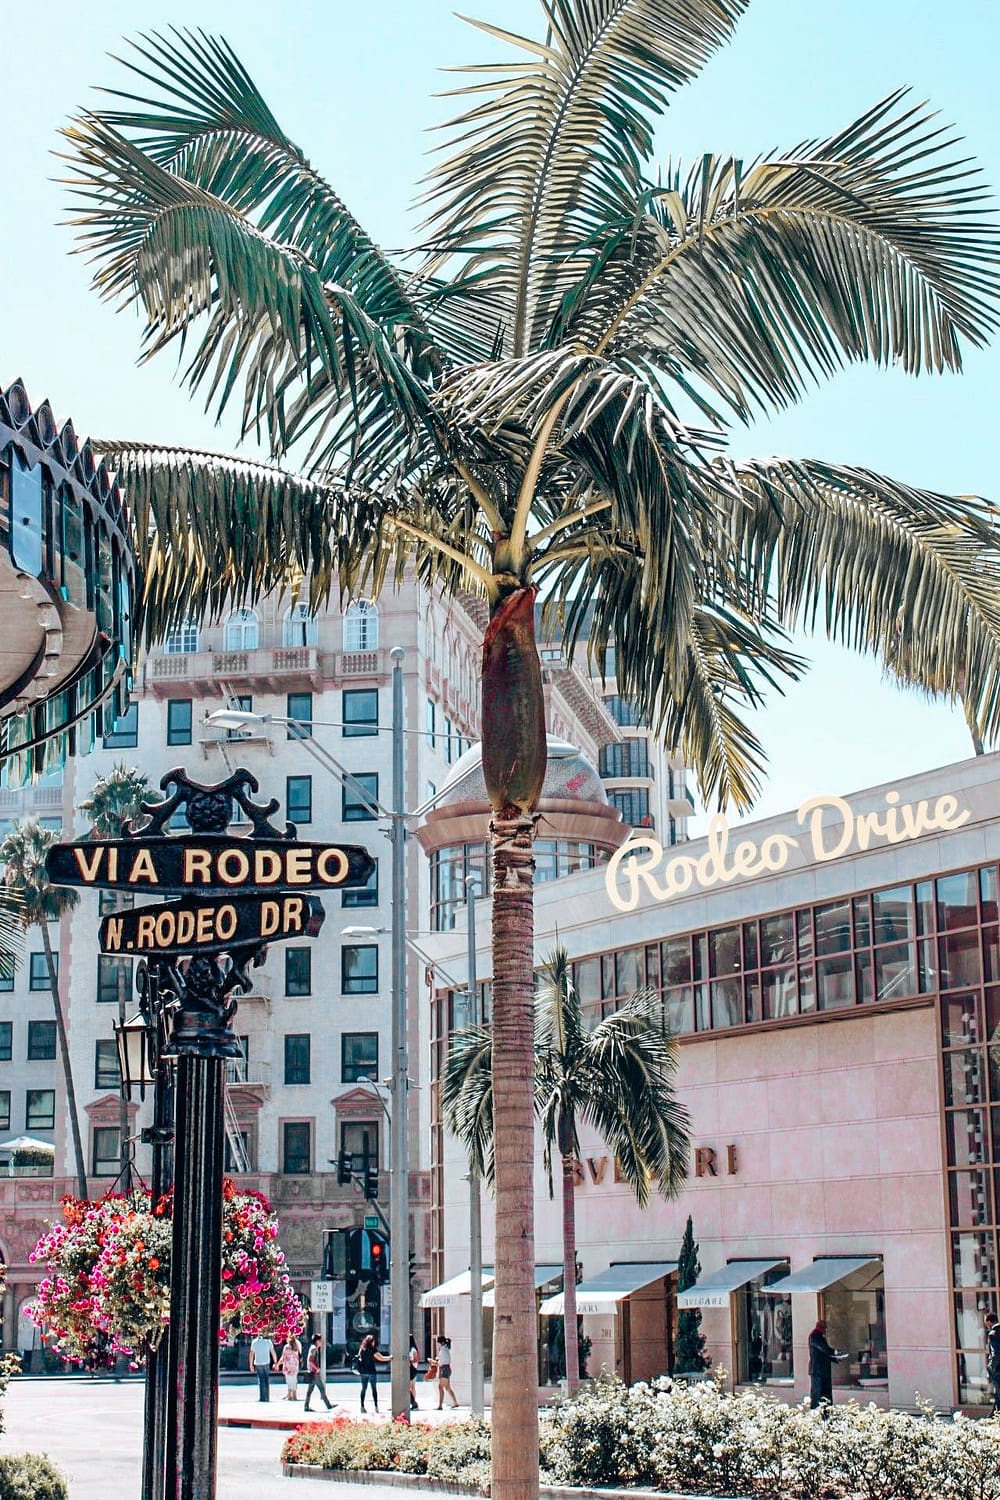 a sign saying rodeo drive with a palm tree